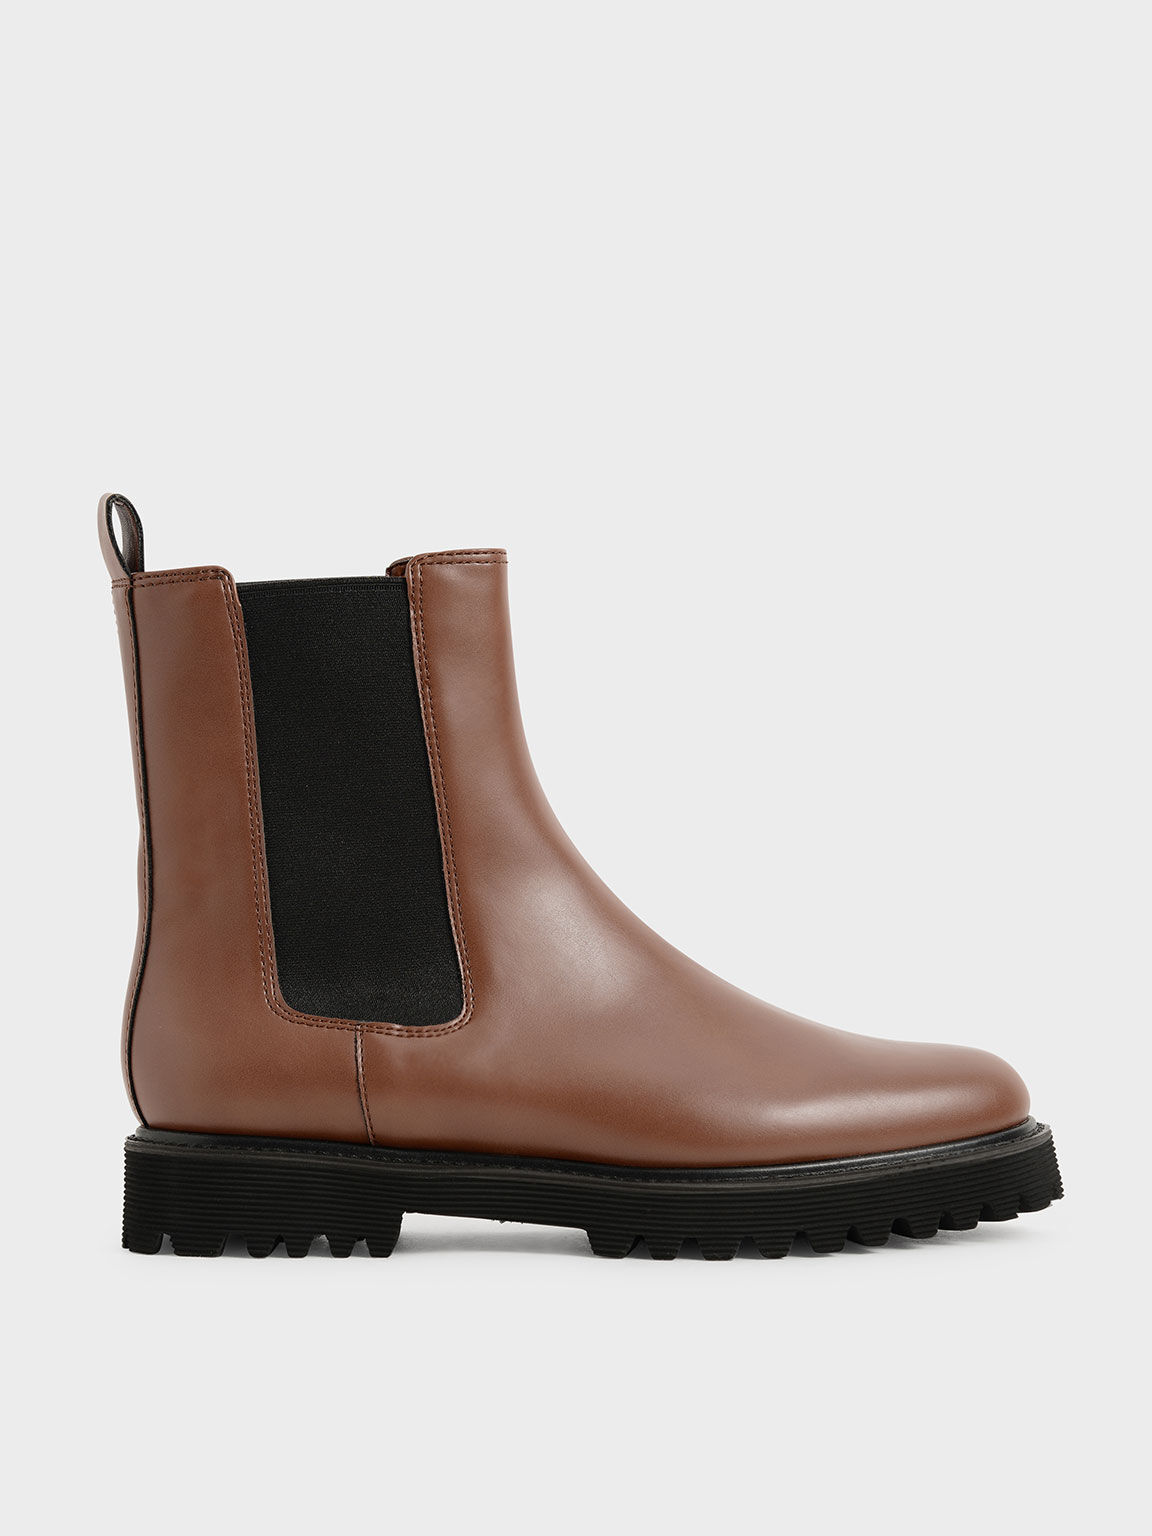 Cleated Sole Chelsea Boots, Cognac, hi-res